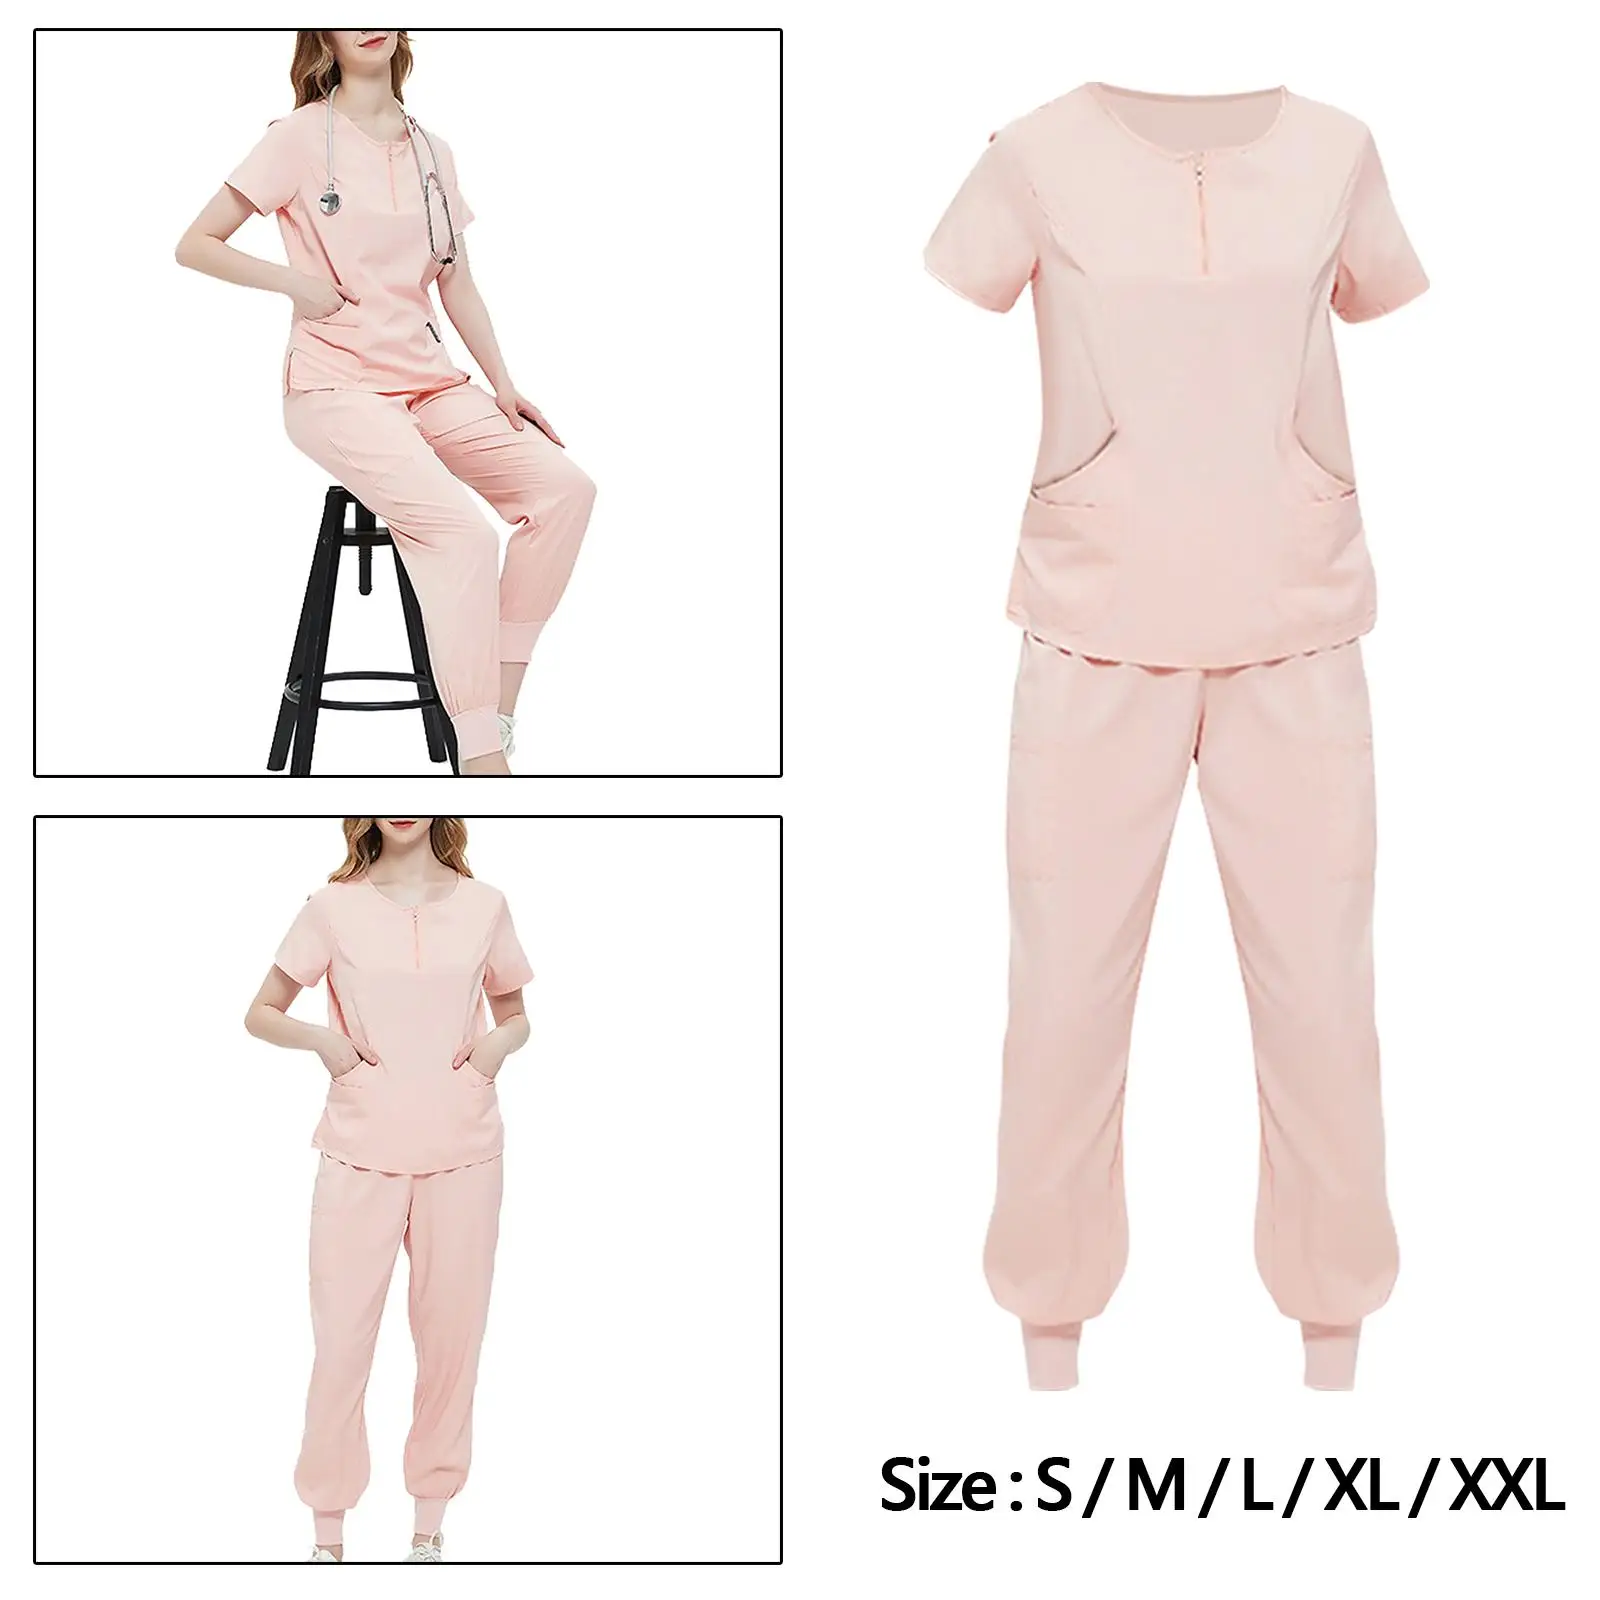 Uniforms Scrub Set Nurse Top and Pants for Healthcare Veterinary Cosmetology